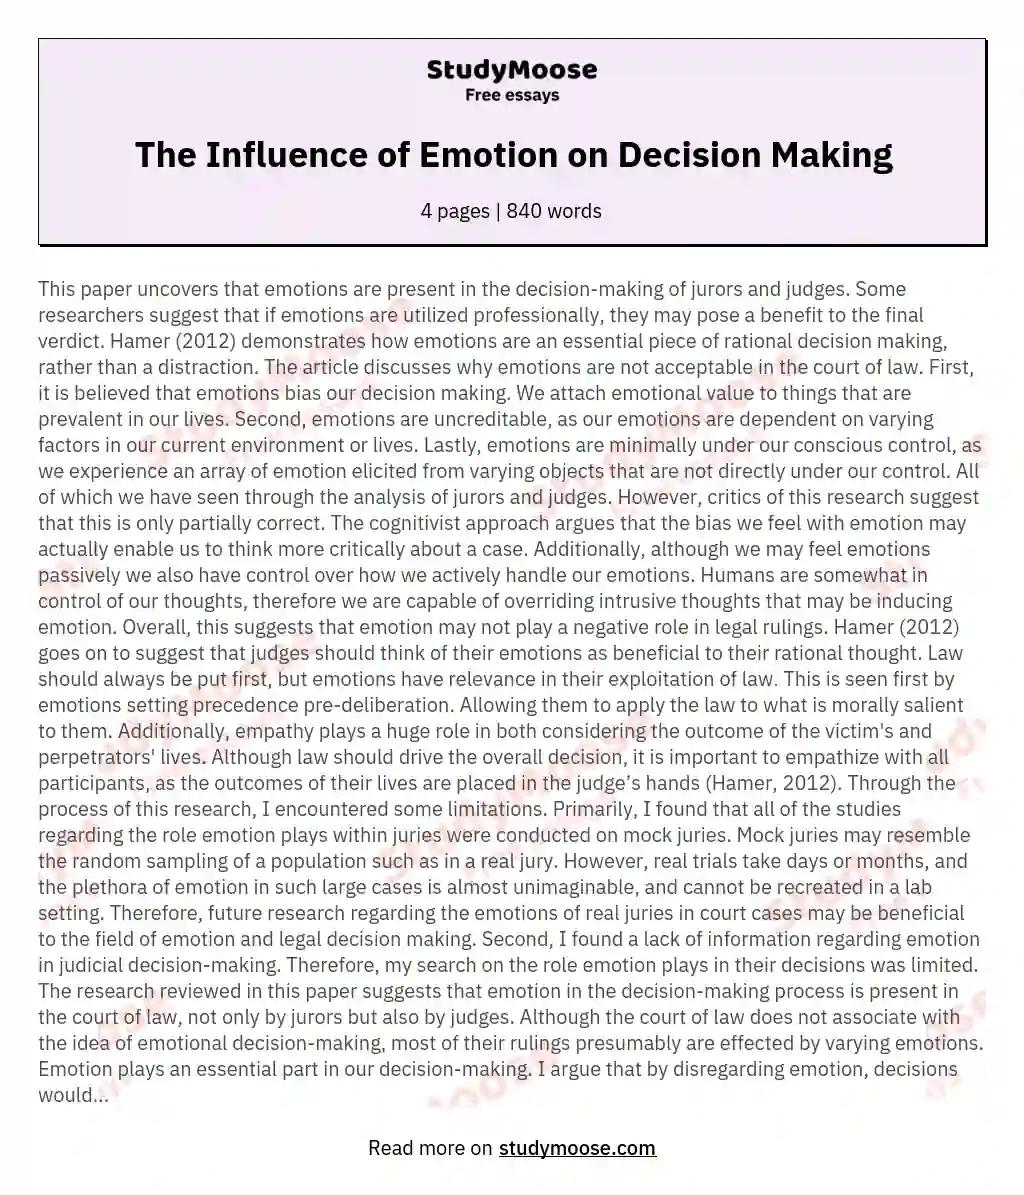 The Influence of Emotion on Decision Making essay